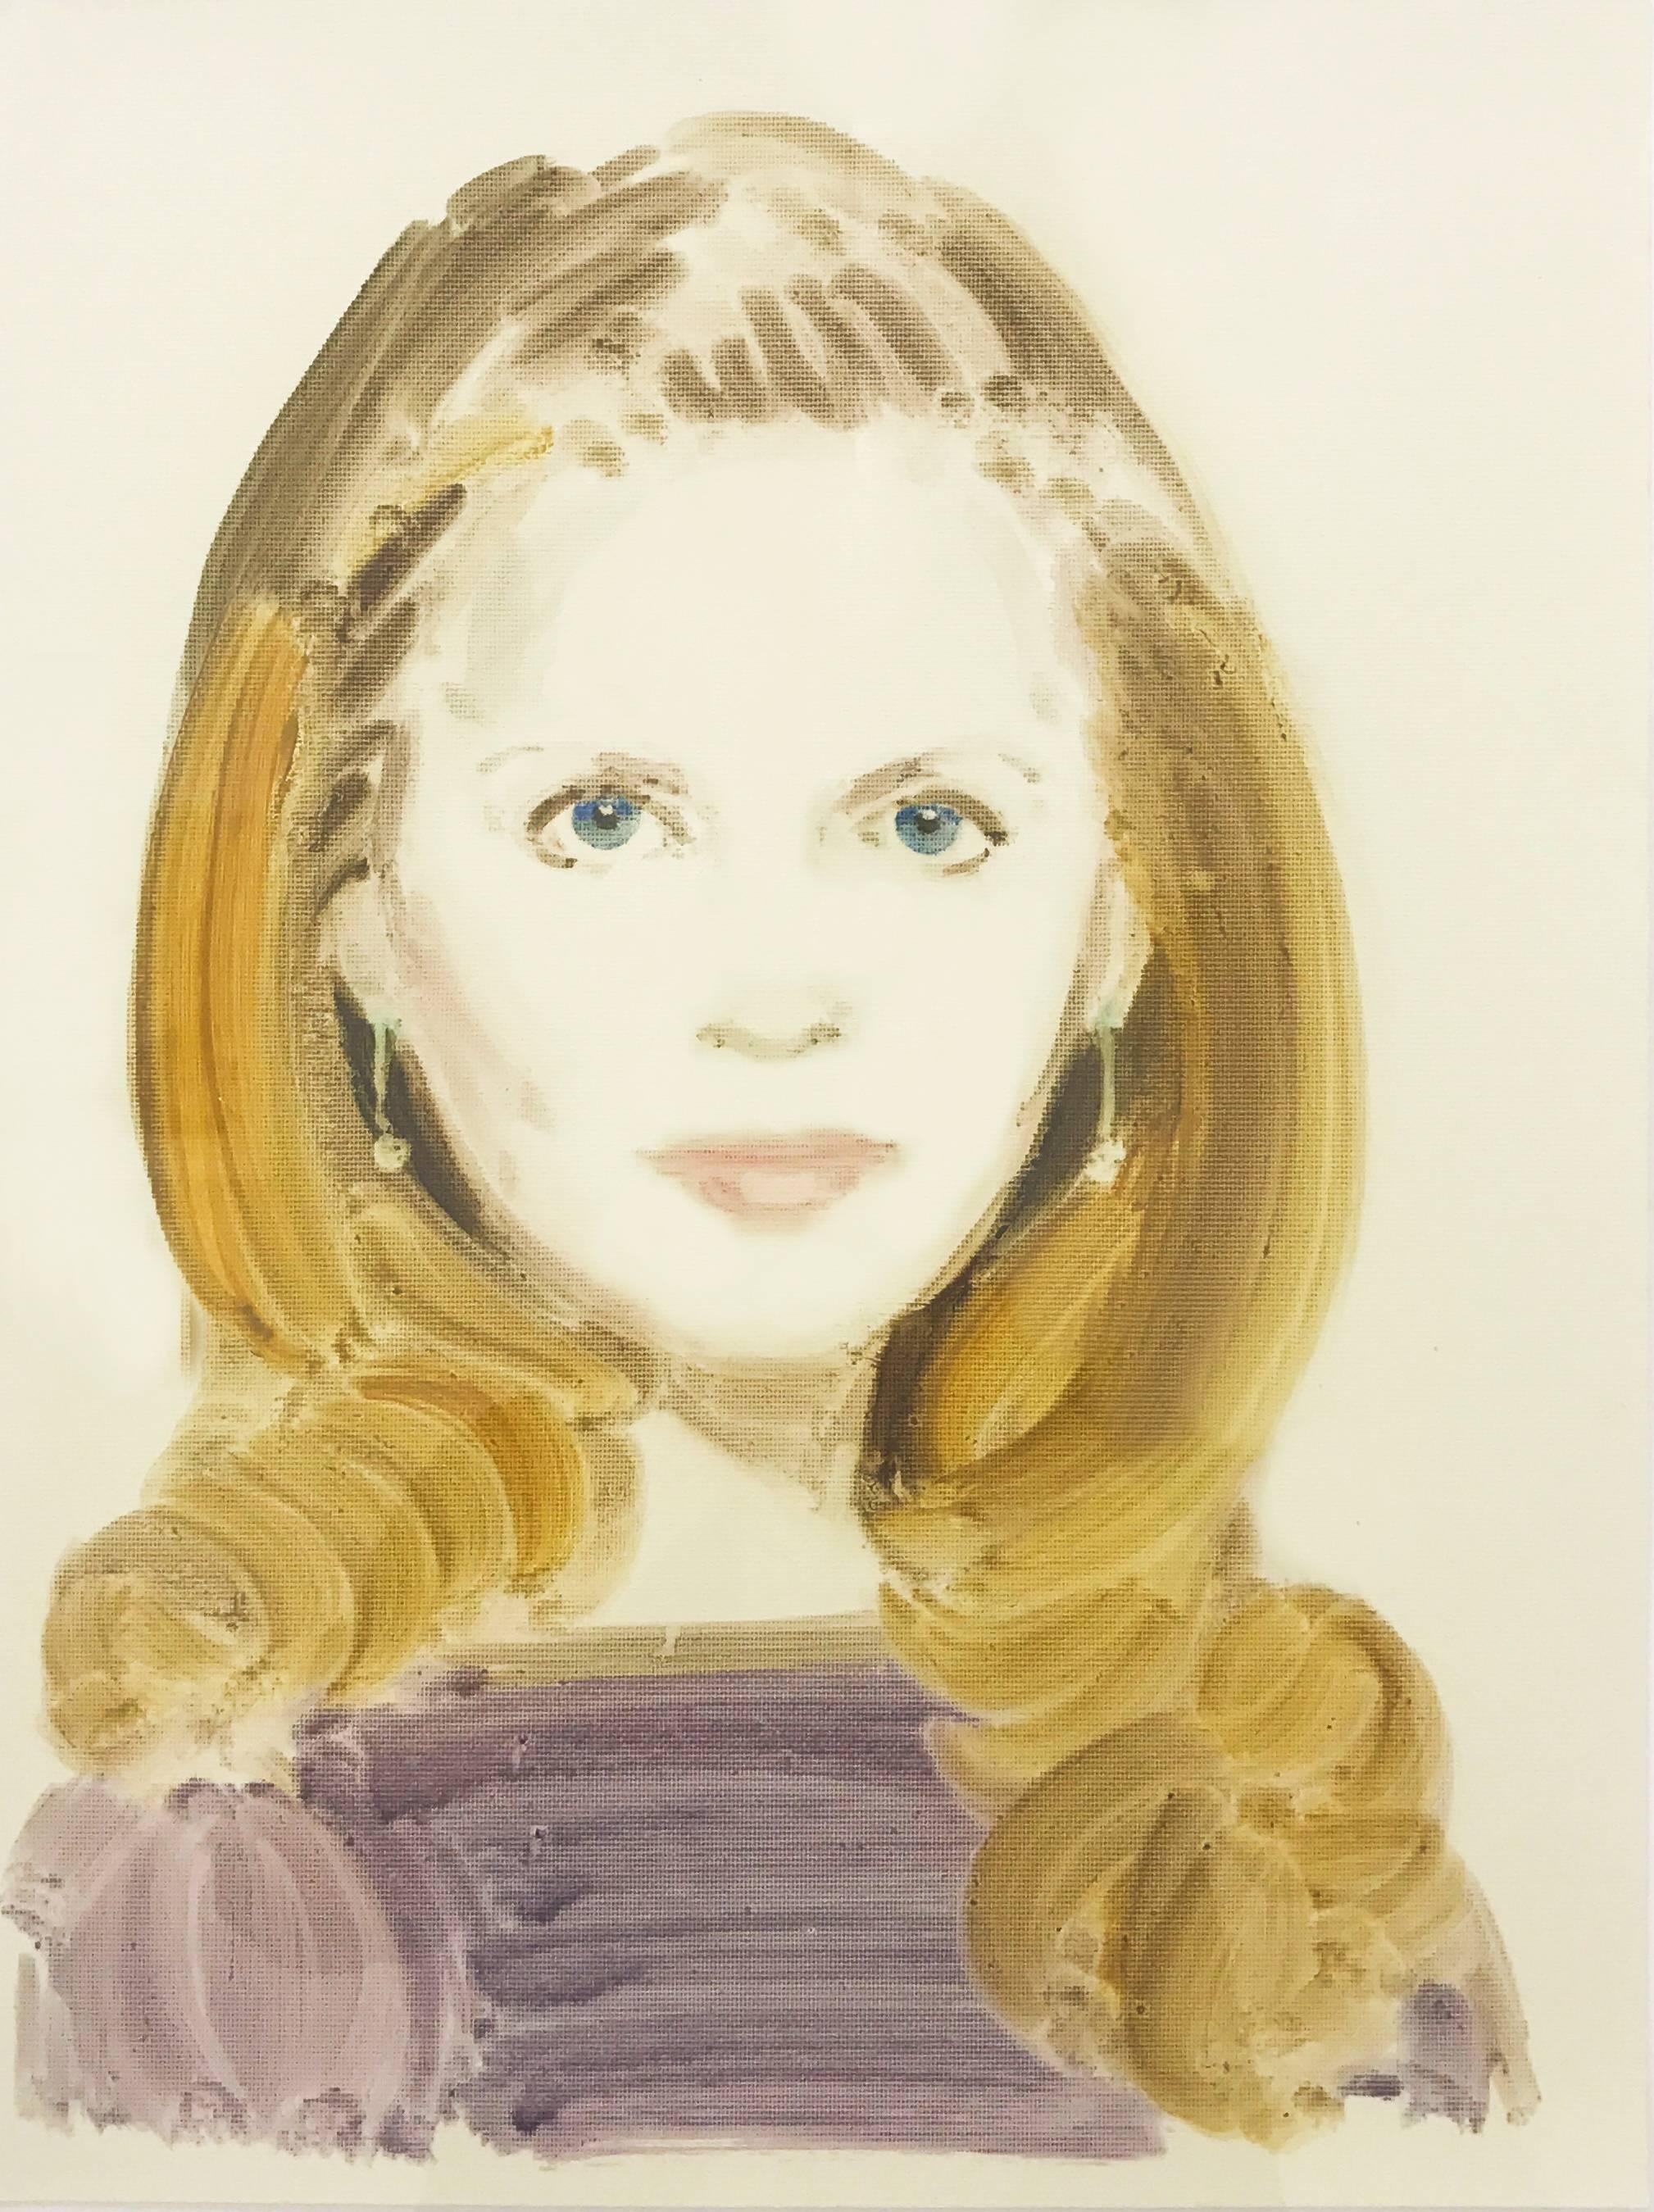 Annie Kevans Portrait Painting - Sarah Ferguson from the series "All About Eve"